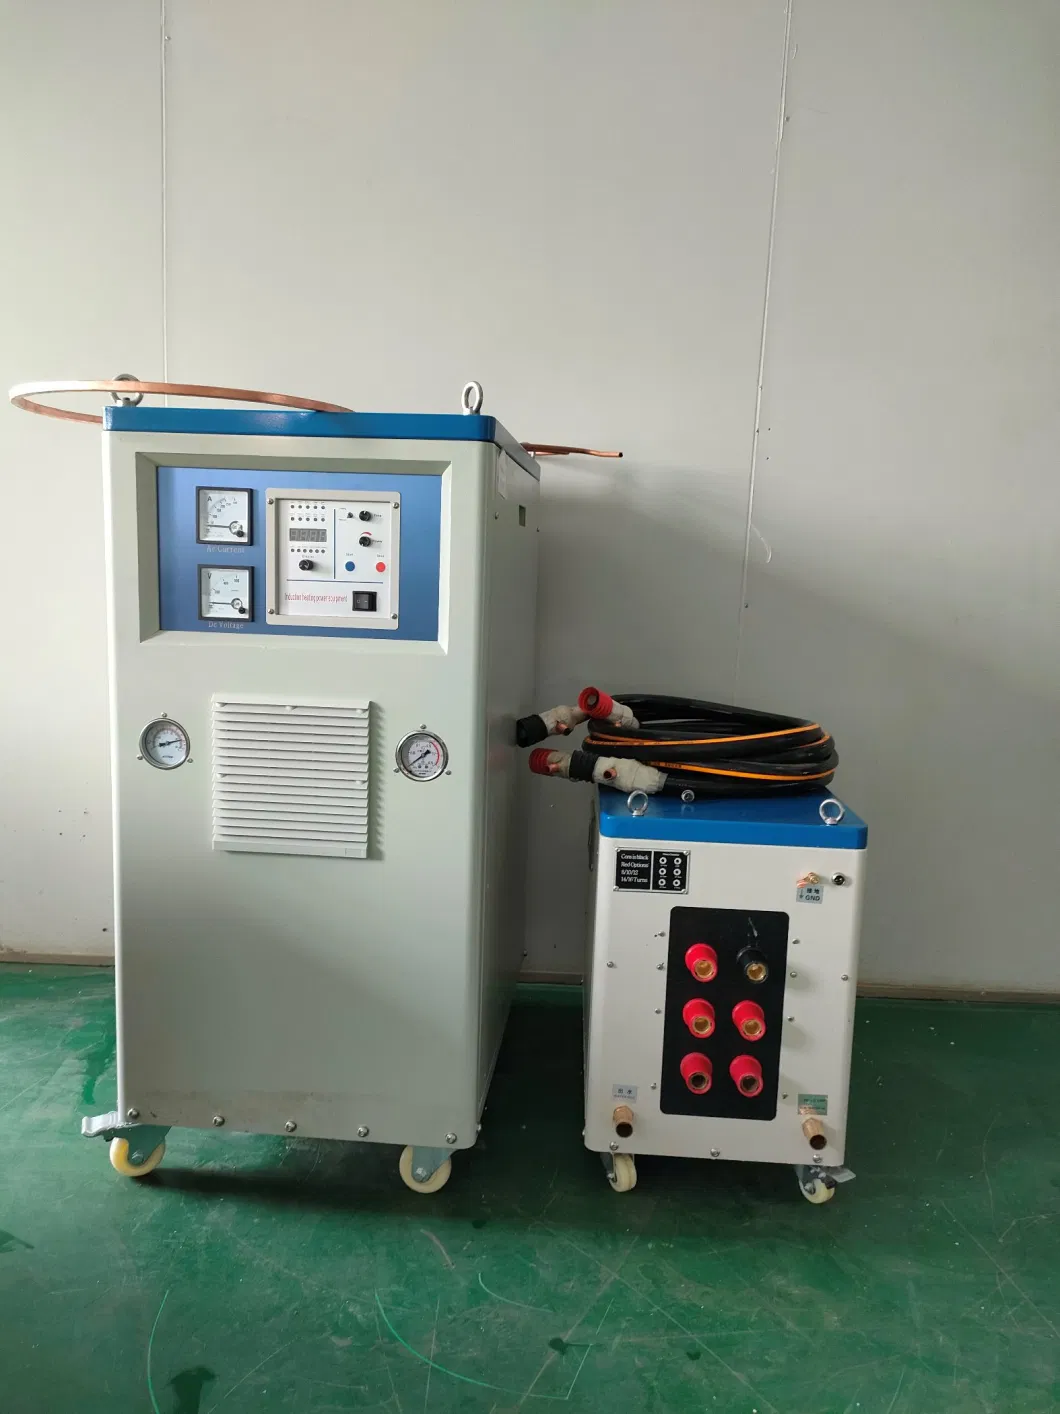 Sf-100kw Ultrasonic Induction Heating Equipment for Quenching, Annealing, Tempering, Forging, Hardening and Melting